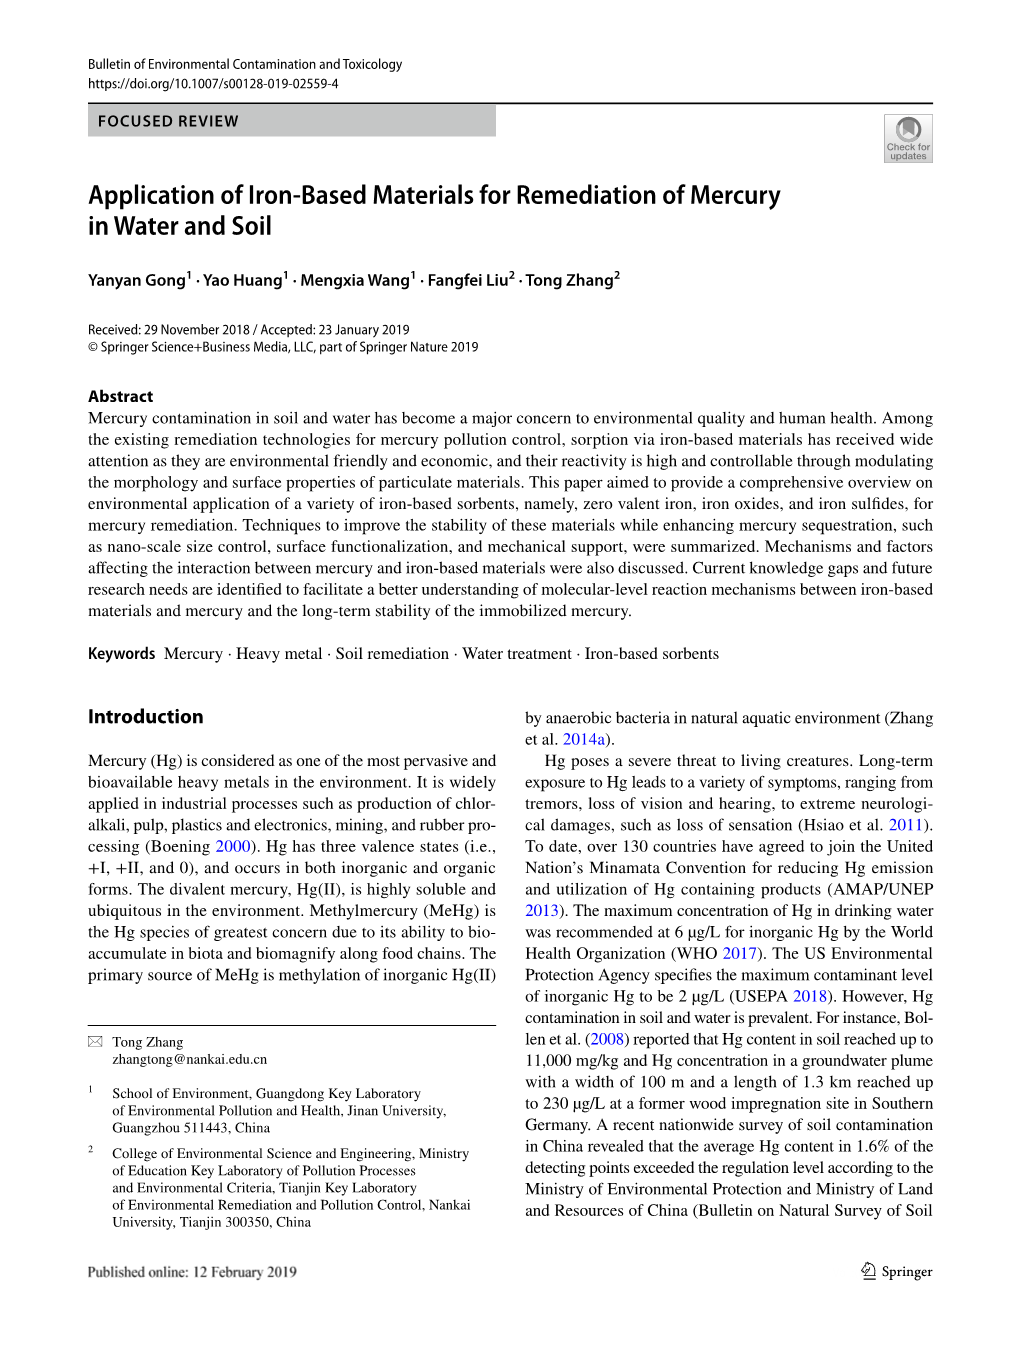 Application of Iron-Based Materials for Remediation of Mercury in Water and Soil